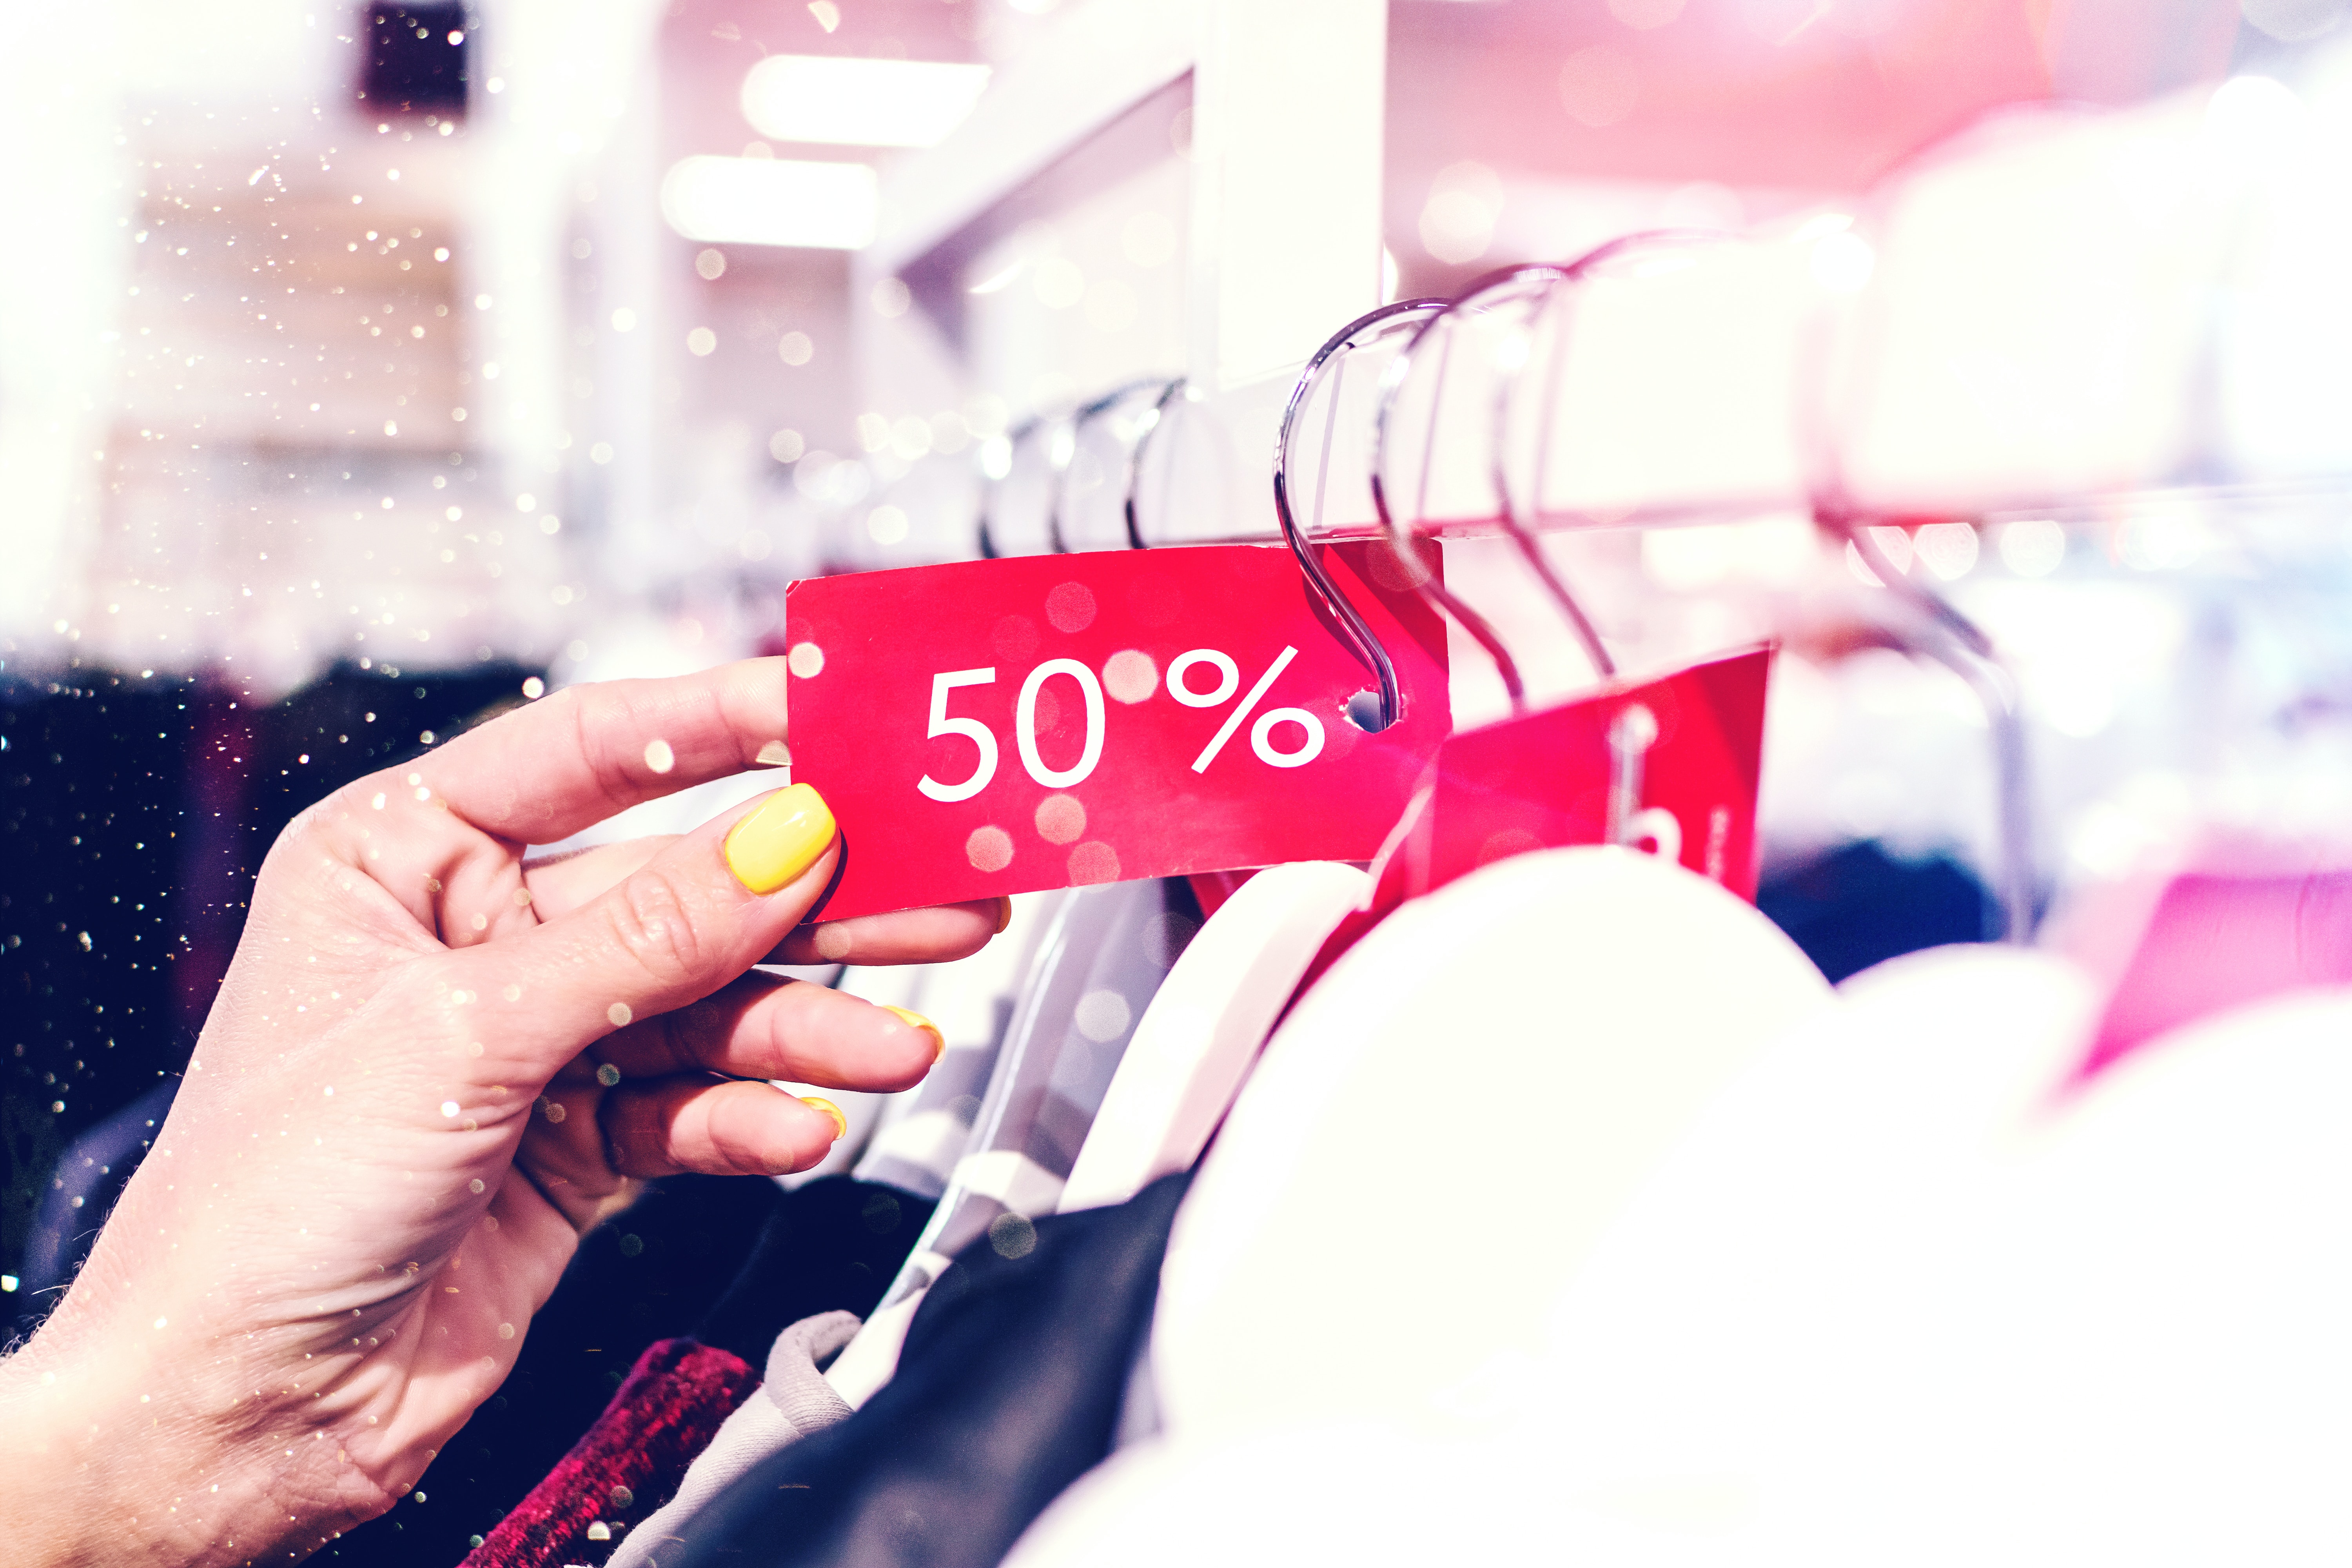 Digital Promotions: what’s in it for the shopper?